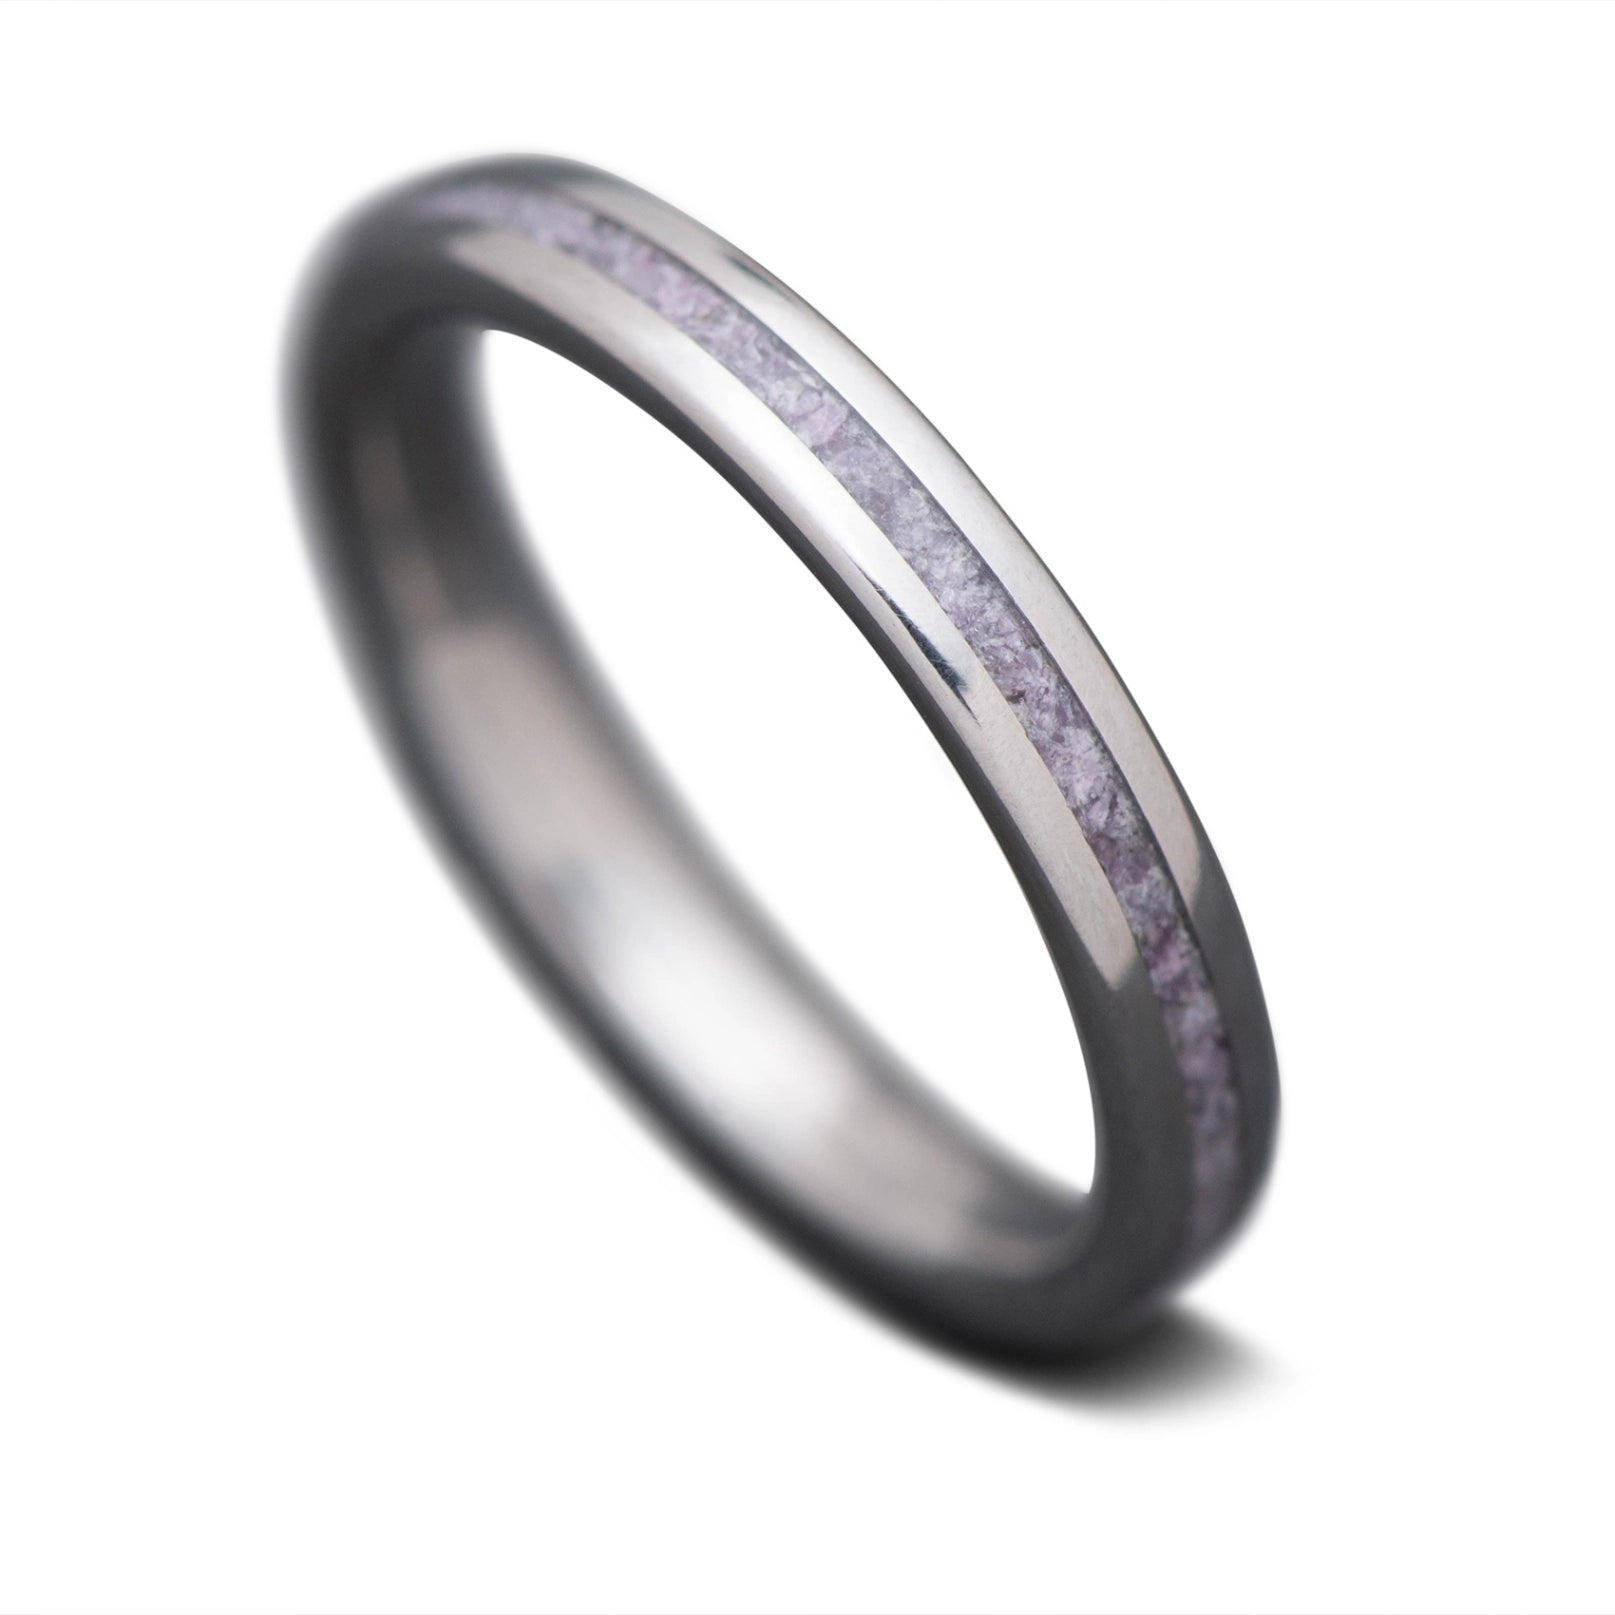 Titanium core ring with Charoite inlay, 3mm -THE ANCHOR